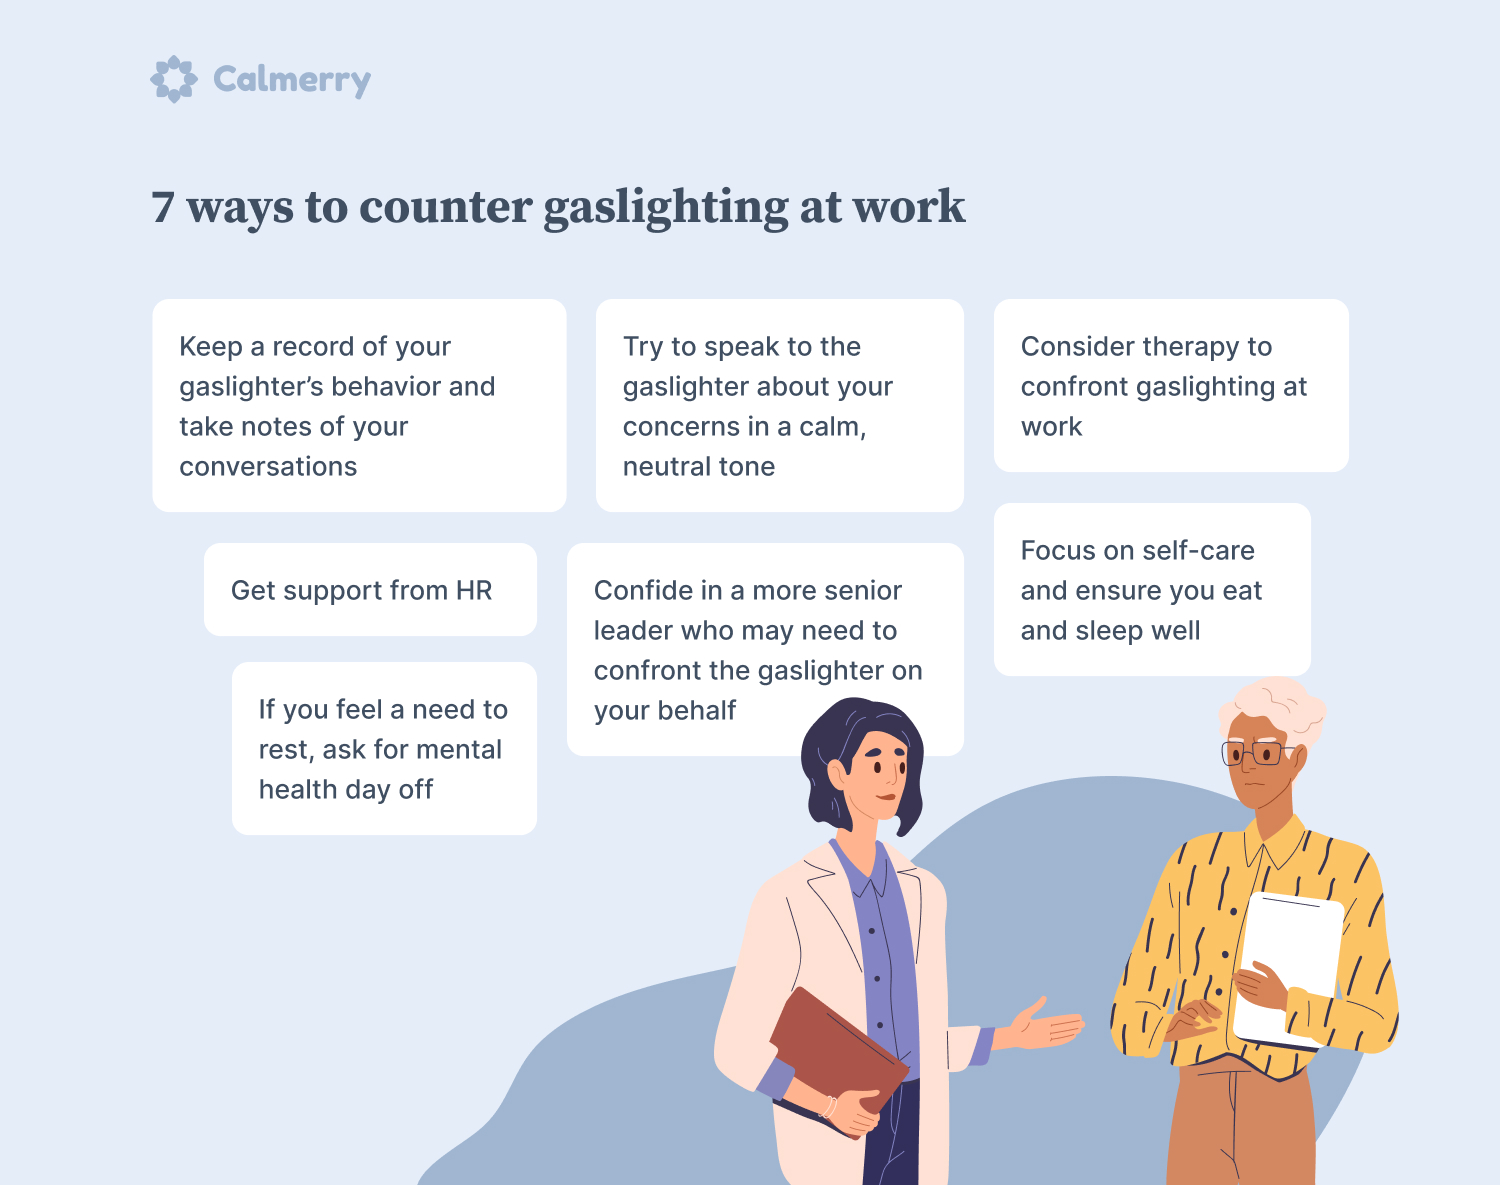 7 ways to counter gaslighting at work Keep a record of your gaslighter’s behavior and take notes of your conversations Try to speak to the gaslighter about your concerns in a calm, neutral tone Confide in a more senior leader who may need to confront the gaslighter on your behalf Get support from HR Focus on self-care and ensure you eat and sleep well If you feel a need to rest, ask for mental health day off Consider therapy to confront gaslighting at work